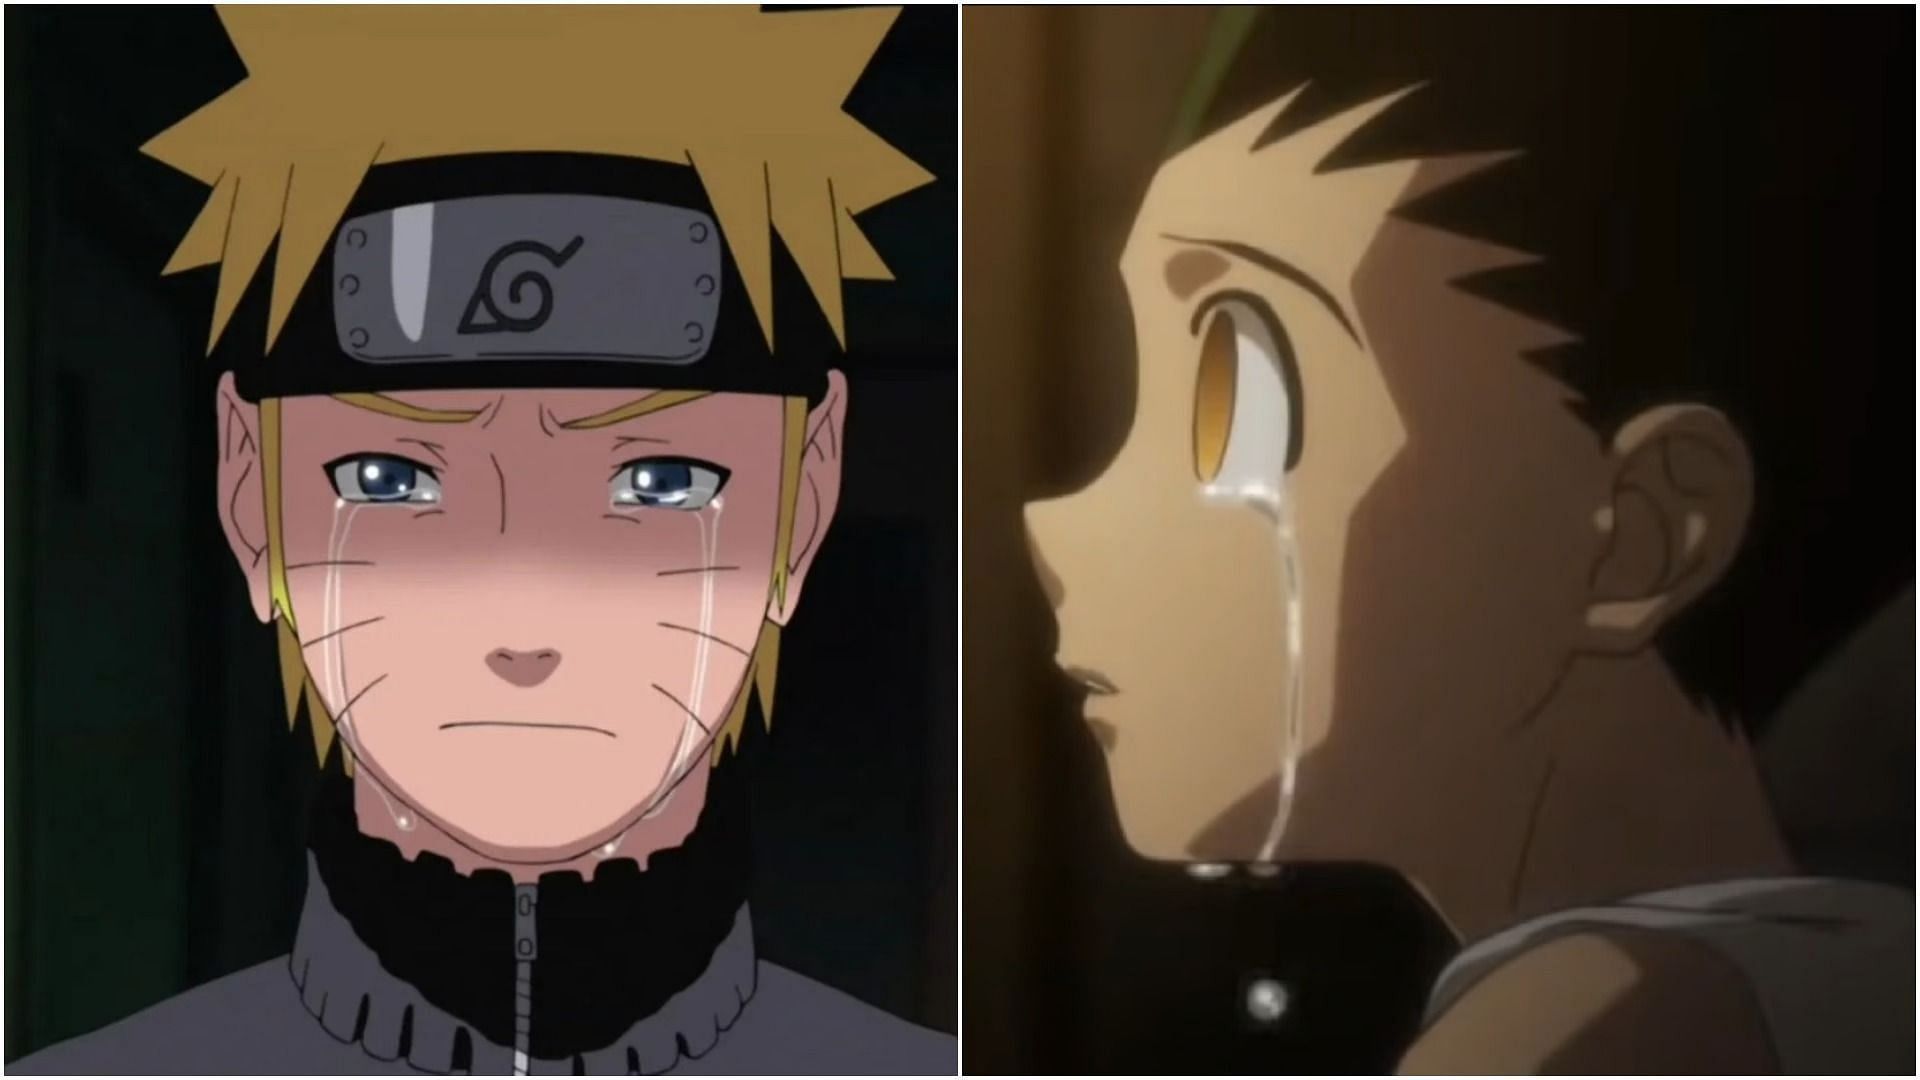 One of these series inspired the other quite a lot (Image via Studio Pierrot and Madhouse).